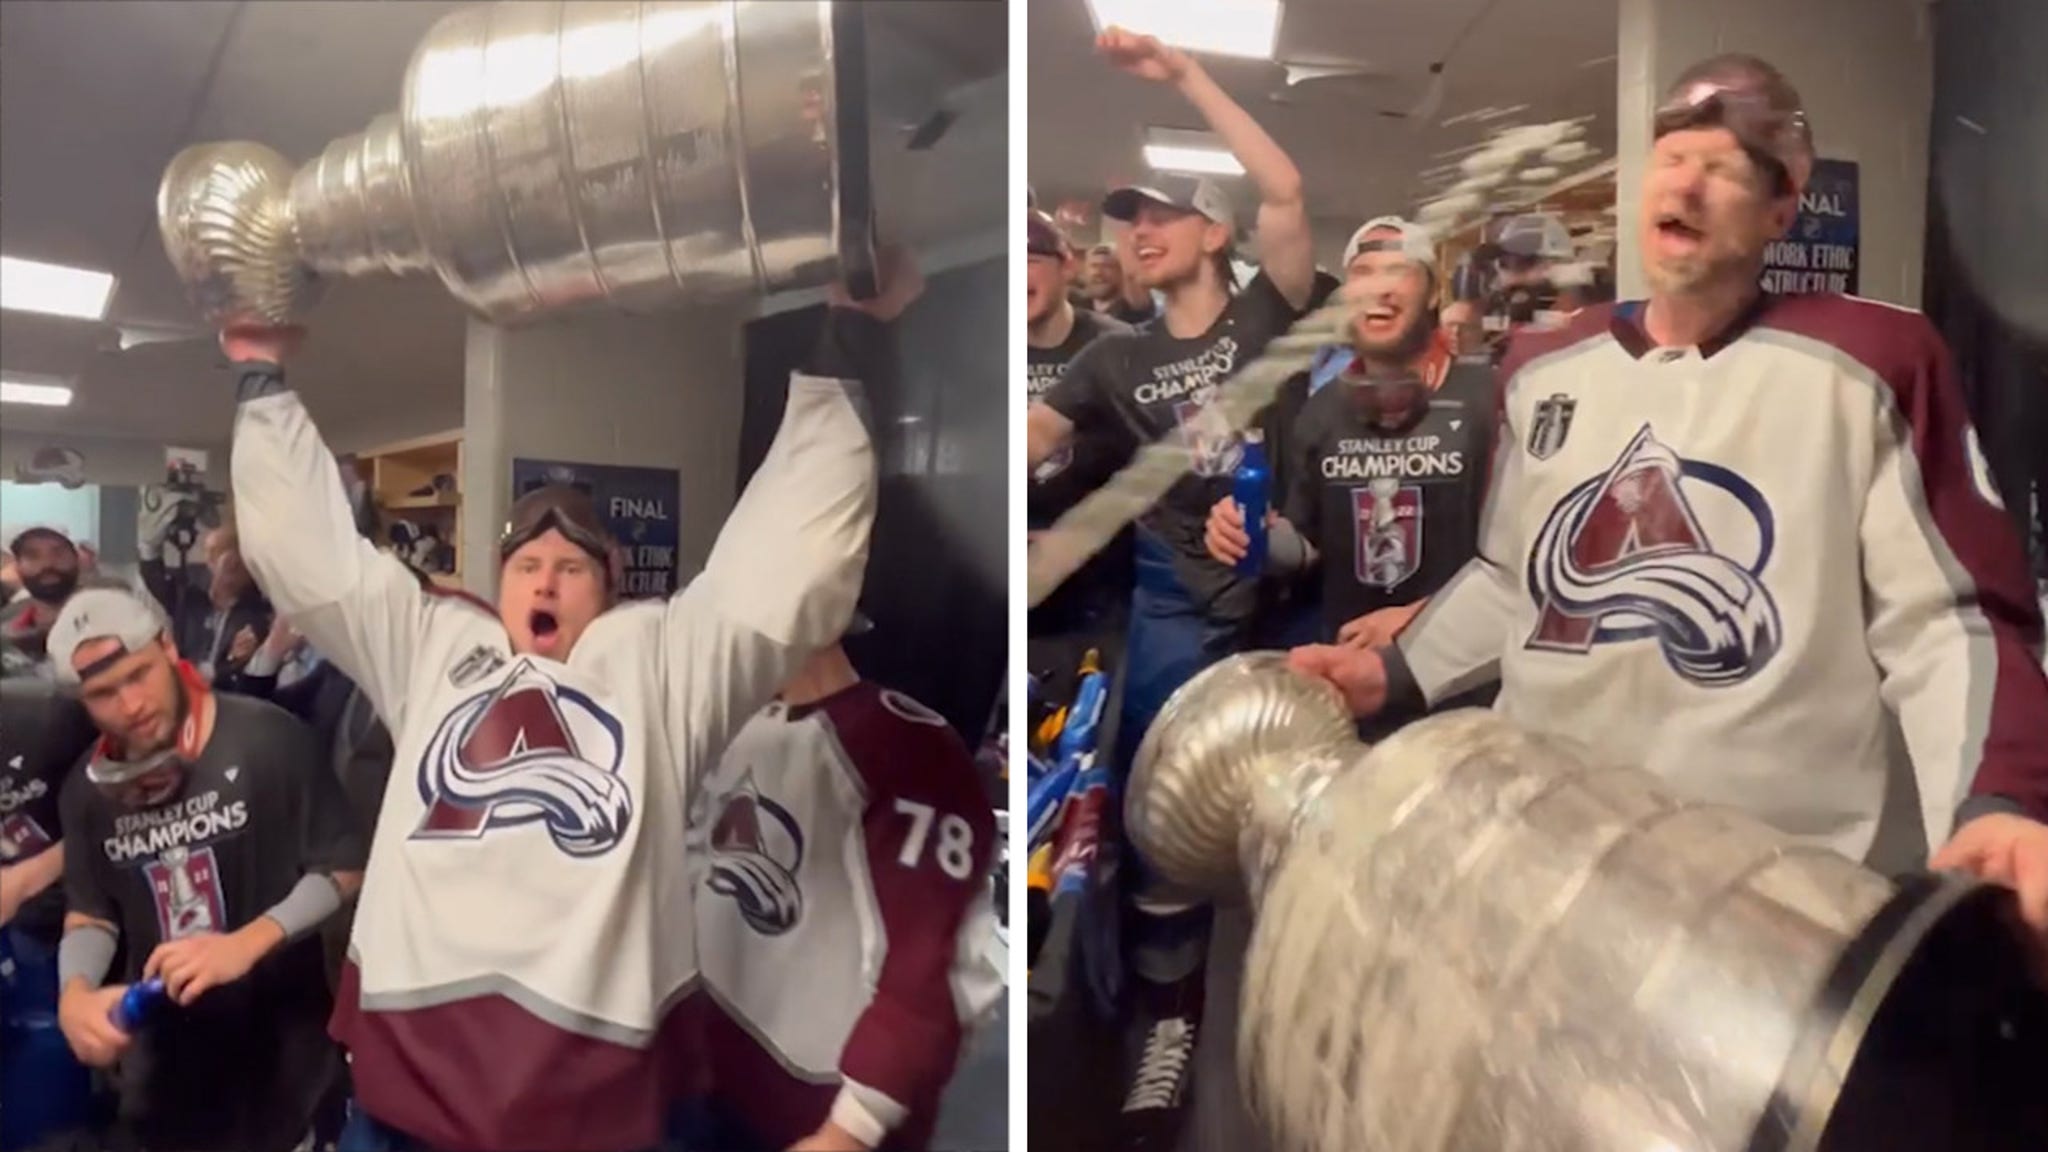 Stanley Cup Damaged During Colorado Avalanche Celebration, Party Continues  in Locker Room